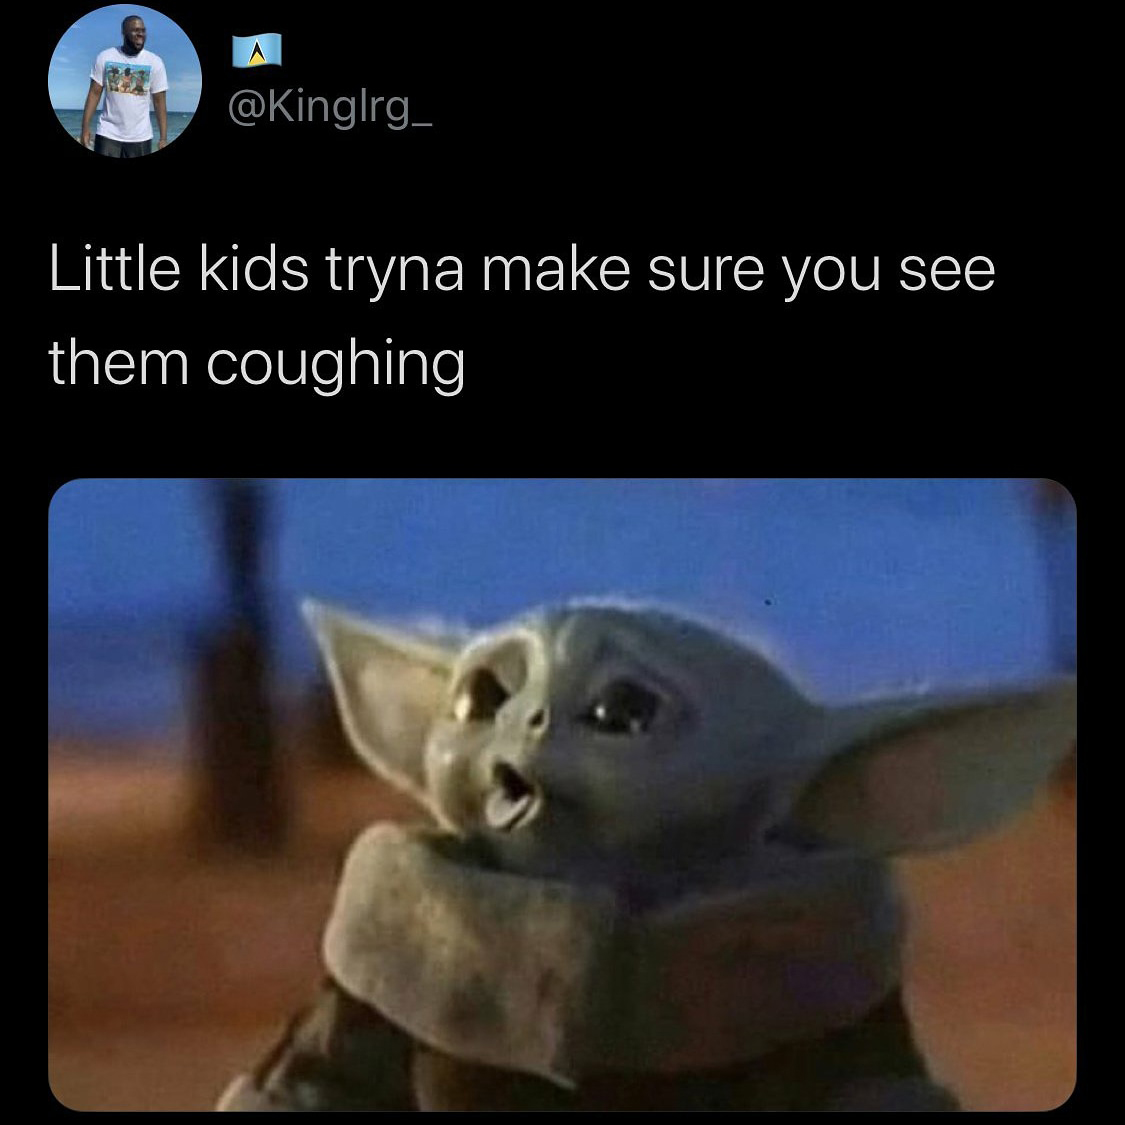 funny memes - dank memes - lil kids cough - A Little kids tryna make sure you see them coughing